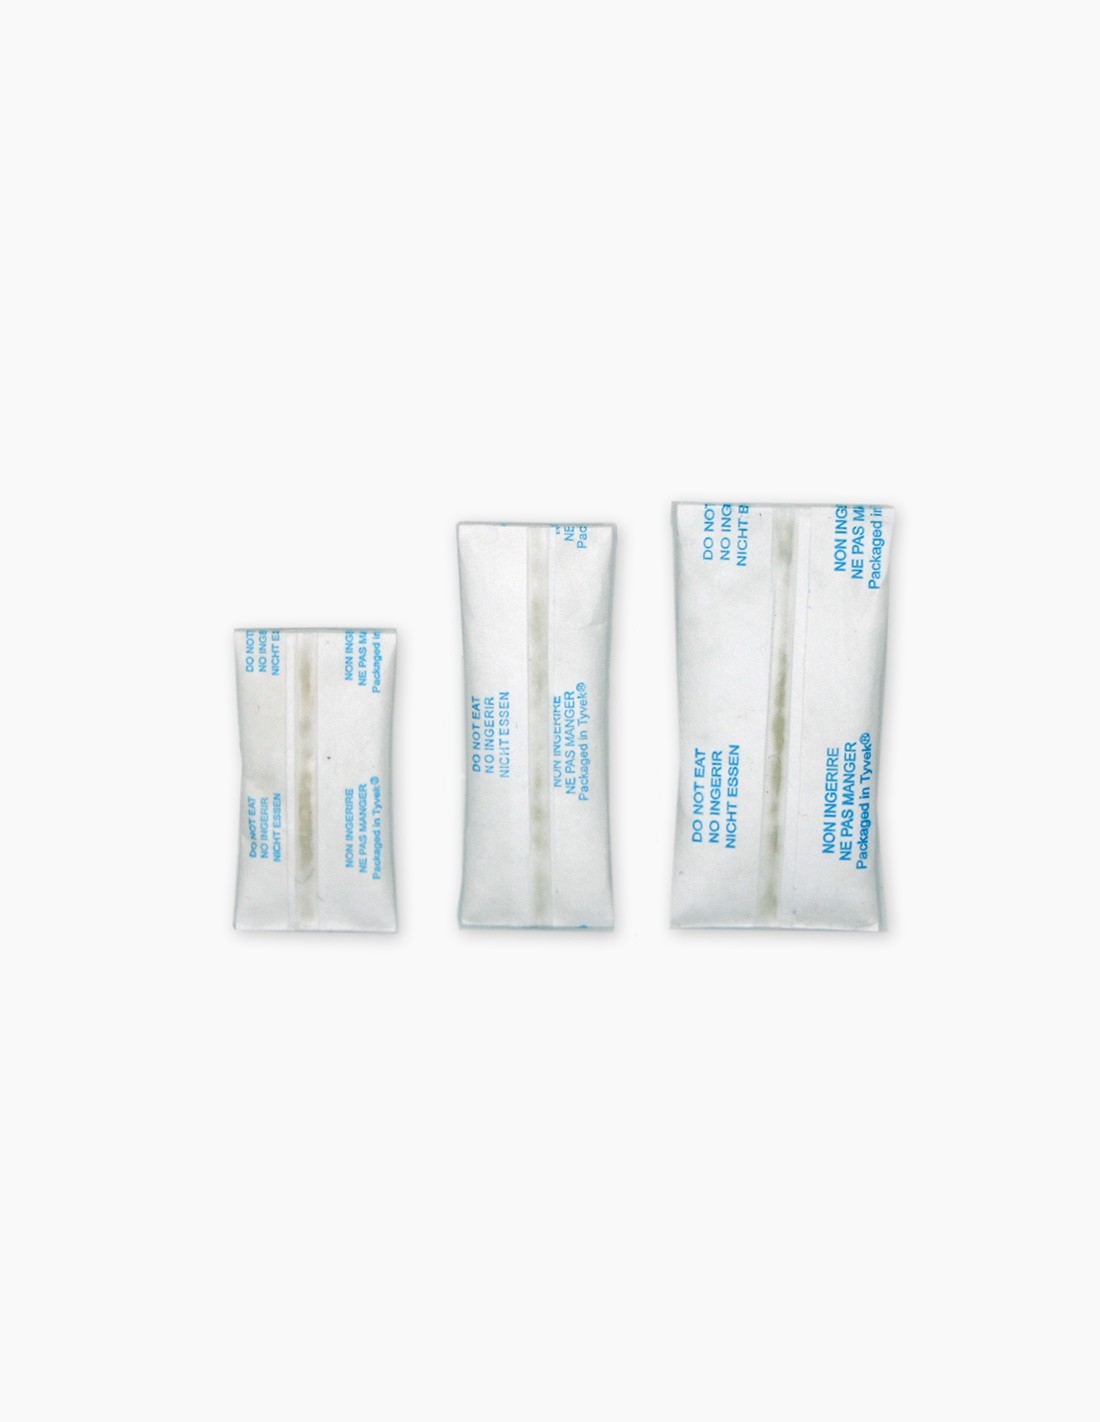 Silica Gel (1 g 2 g 3 g) Micro Bags. Desiccant packs - Conservatis